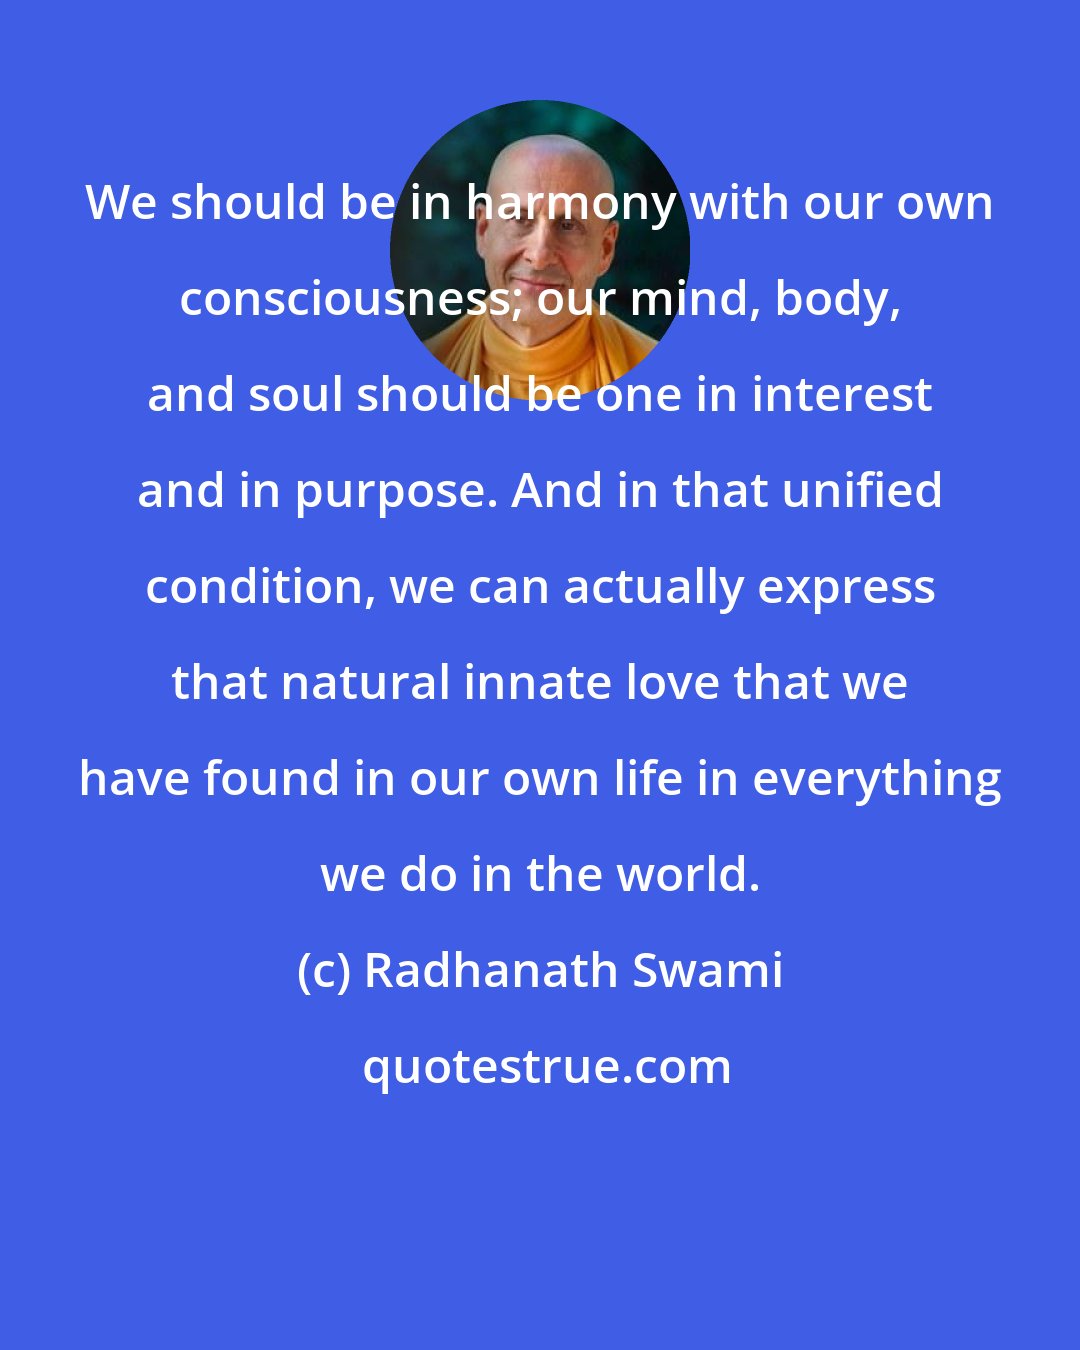 Radhanath Swami: We should be in harmony with our own consciousness; our mind, body, and soul should be one in interest and in purpose. And in that unified condition, we can actually express that natural innate love that we have found in our own life in everything we do in the world.